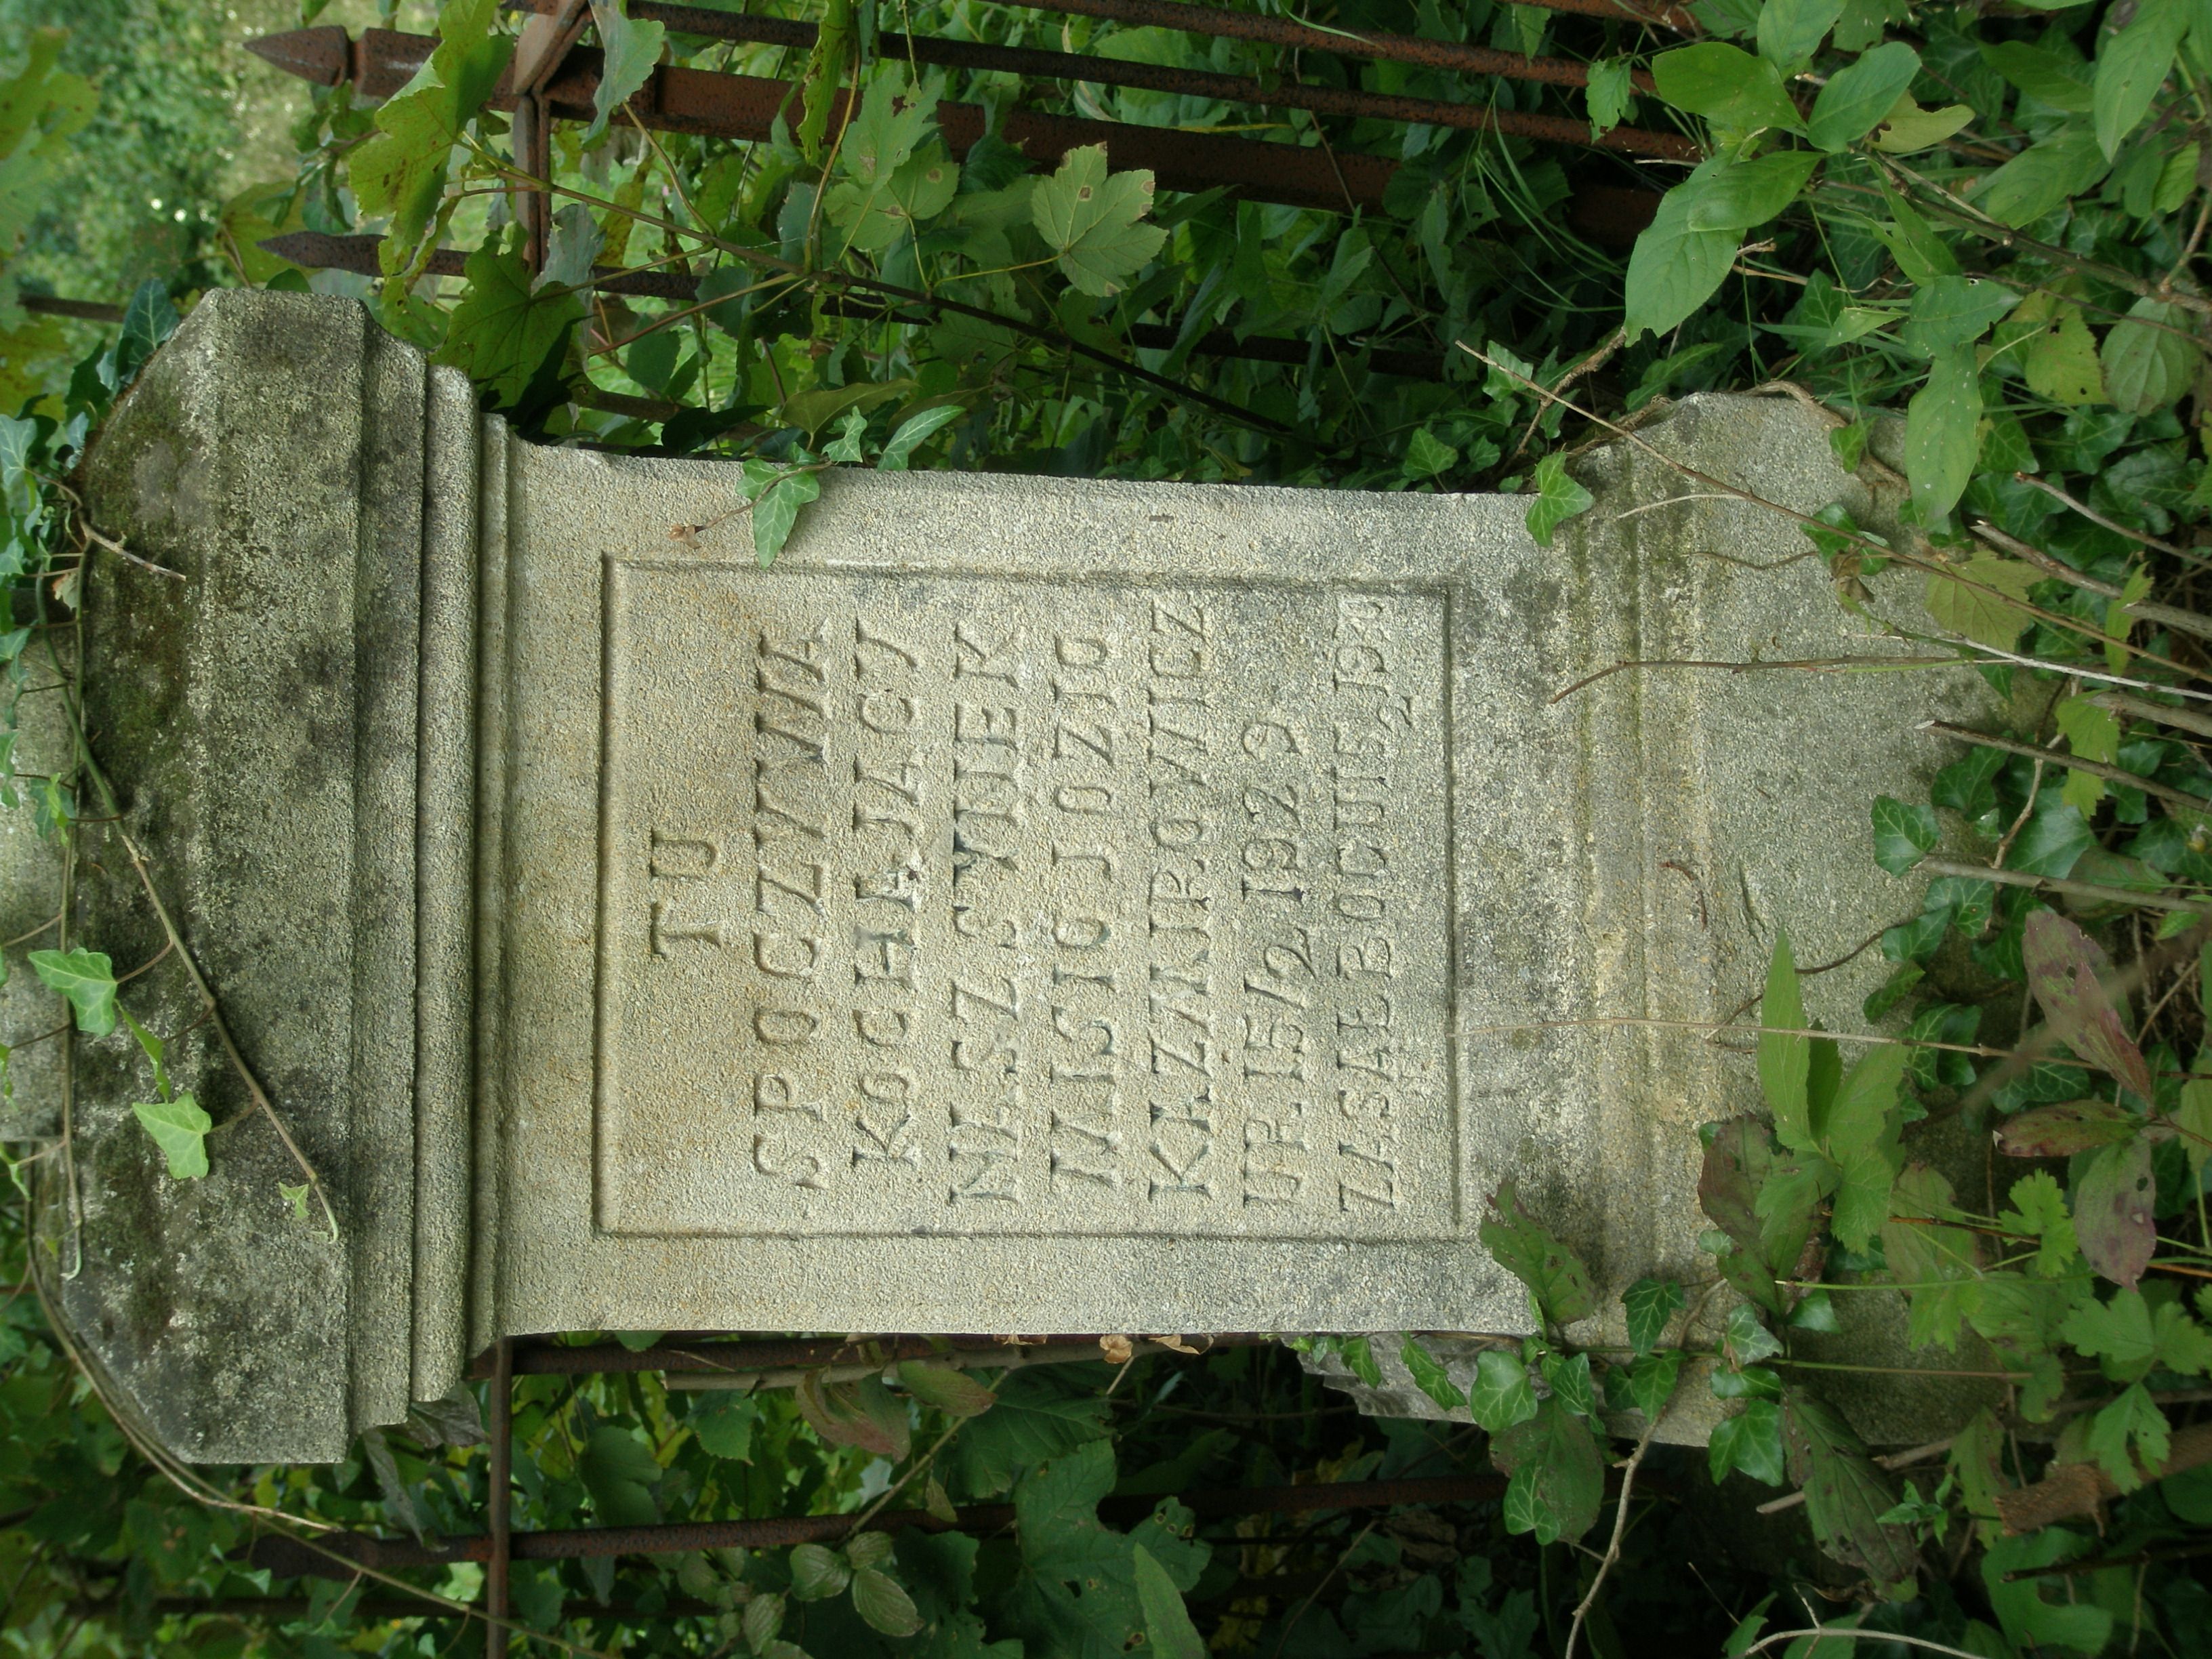 Inscription from the gravestone of Jozef "Misio" Kazimirovich, as of 2006